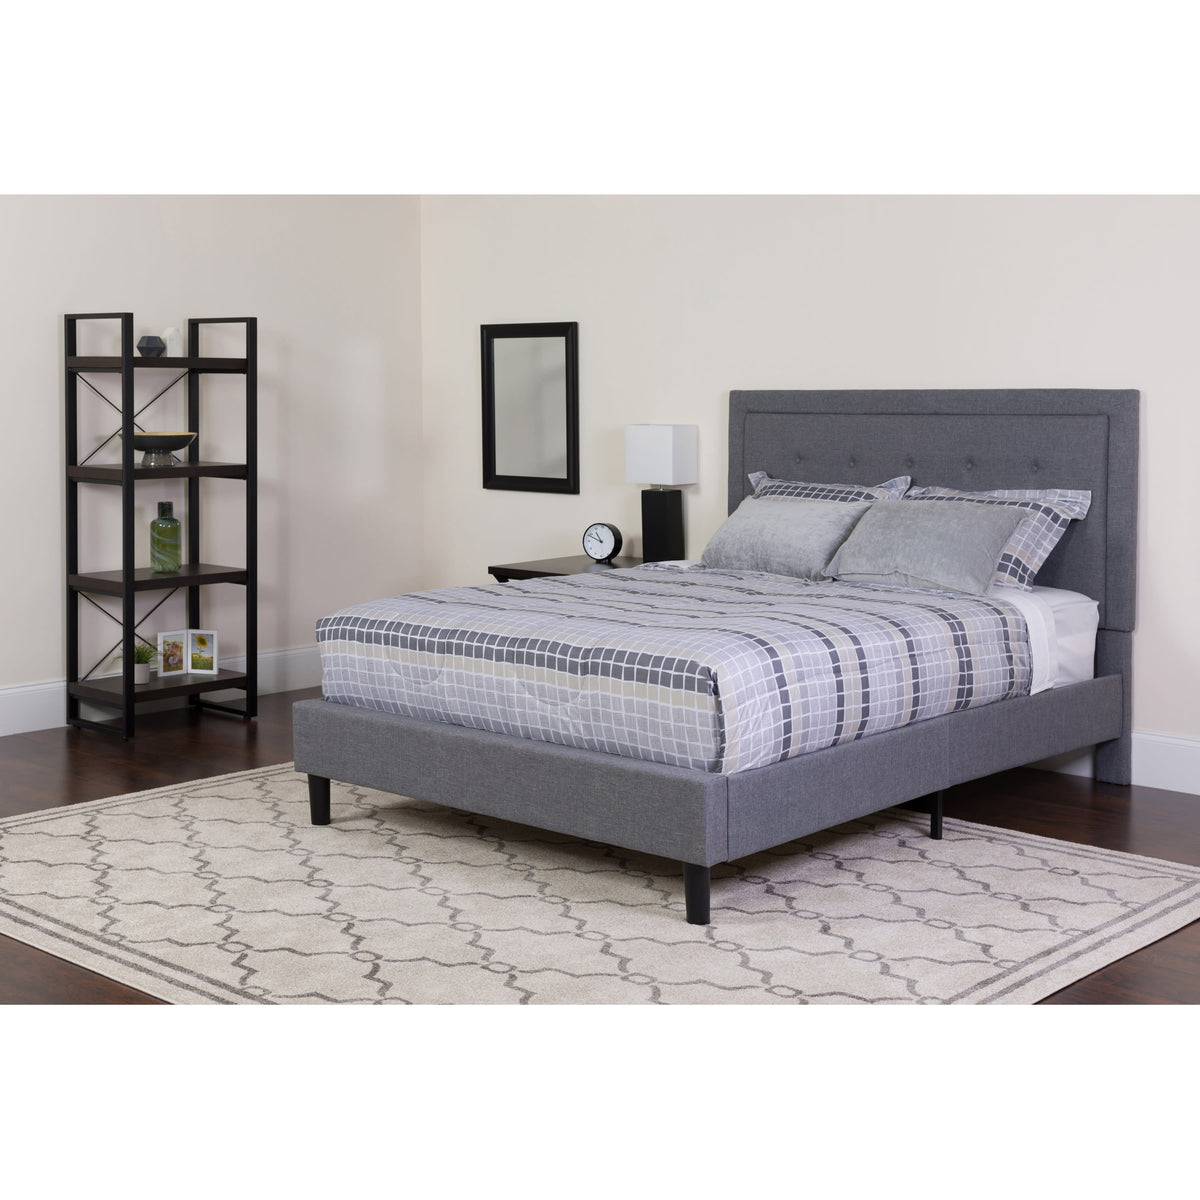 Light Gray,Twin |#| Twin Size Panel Tufted Lt. Gray Fabric Platform Bed with Pocket Spring Mattress